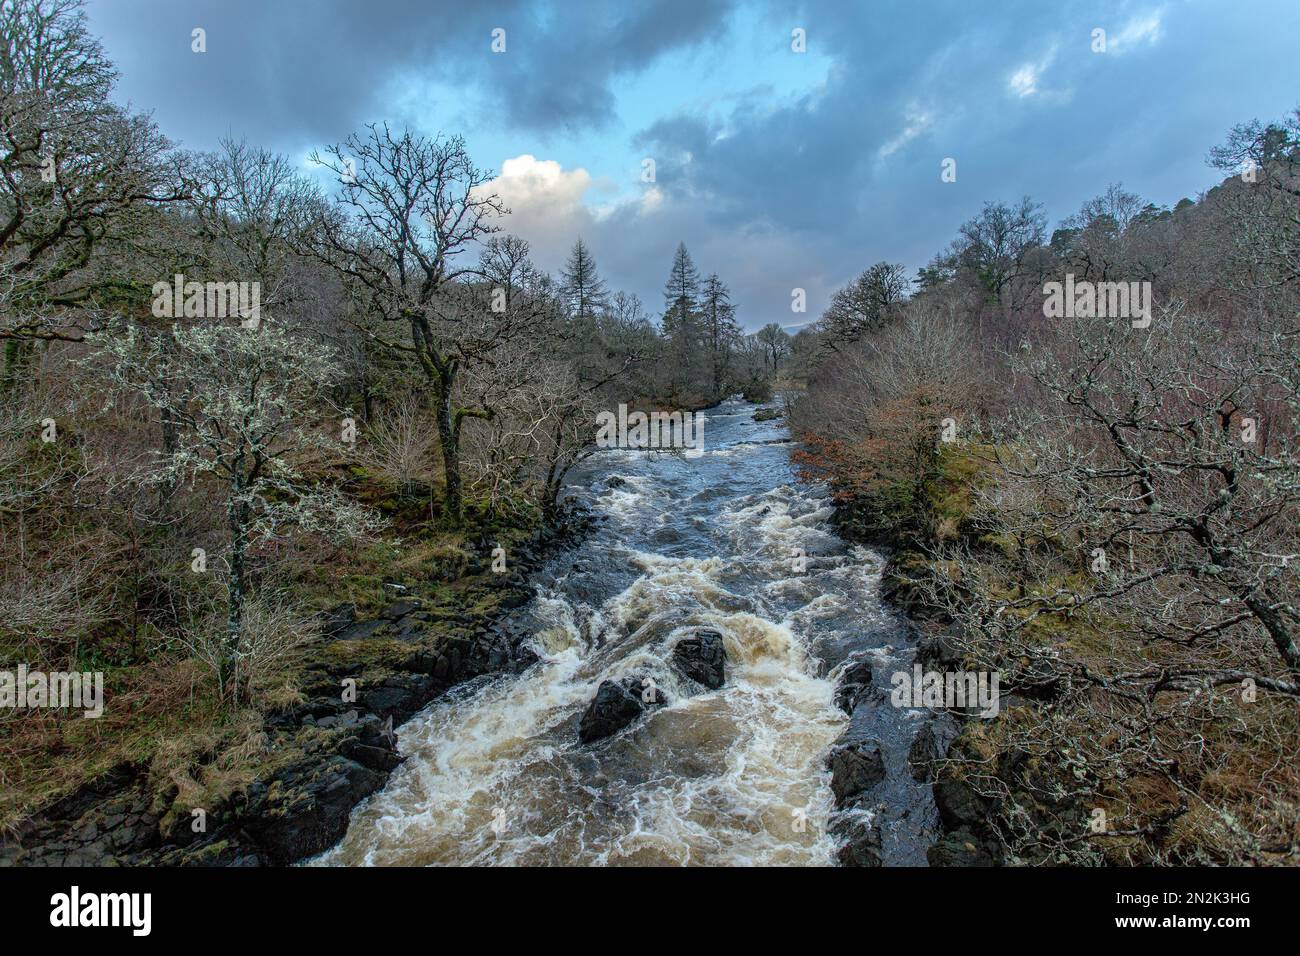 The Aline is the largest river flowing into the north of the Sound of Mull. Stock Photo